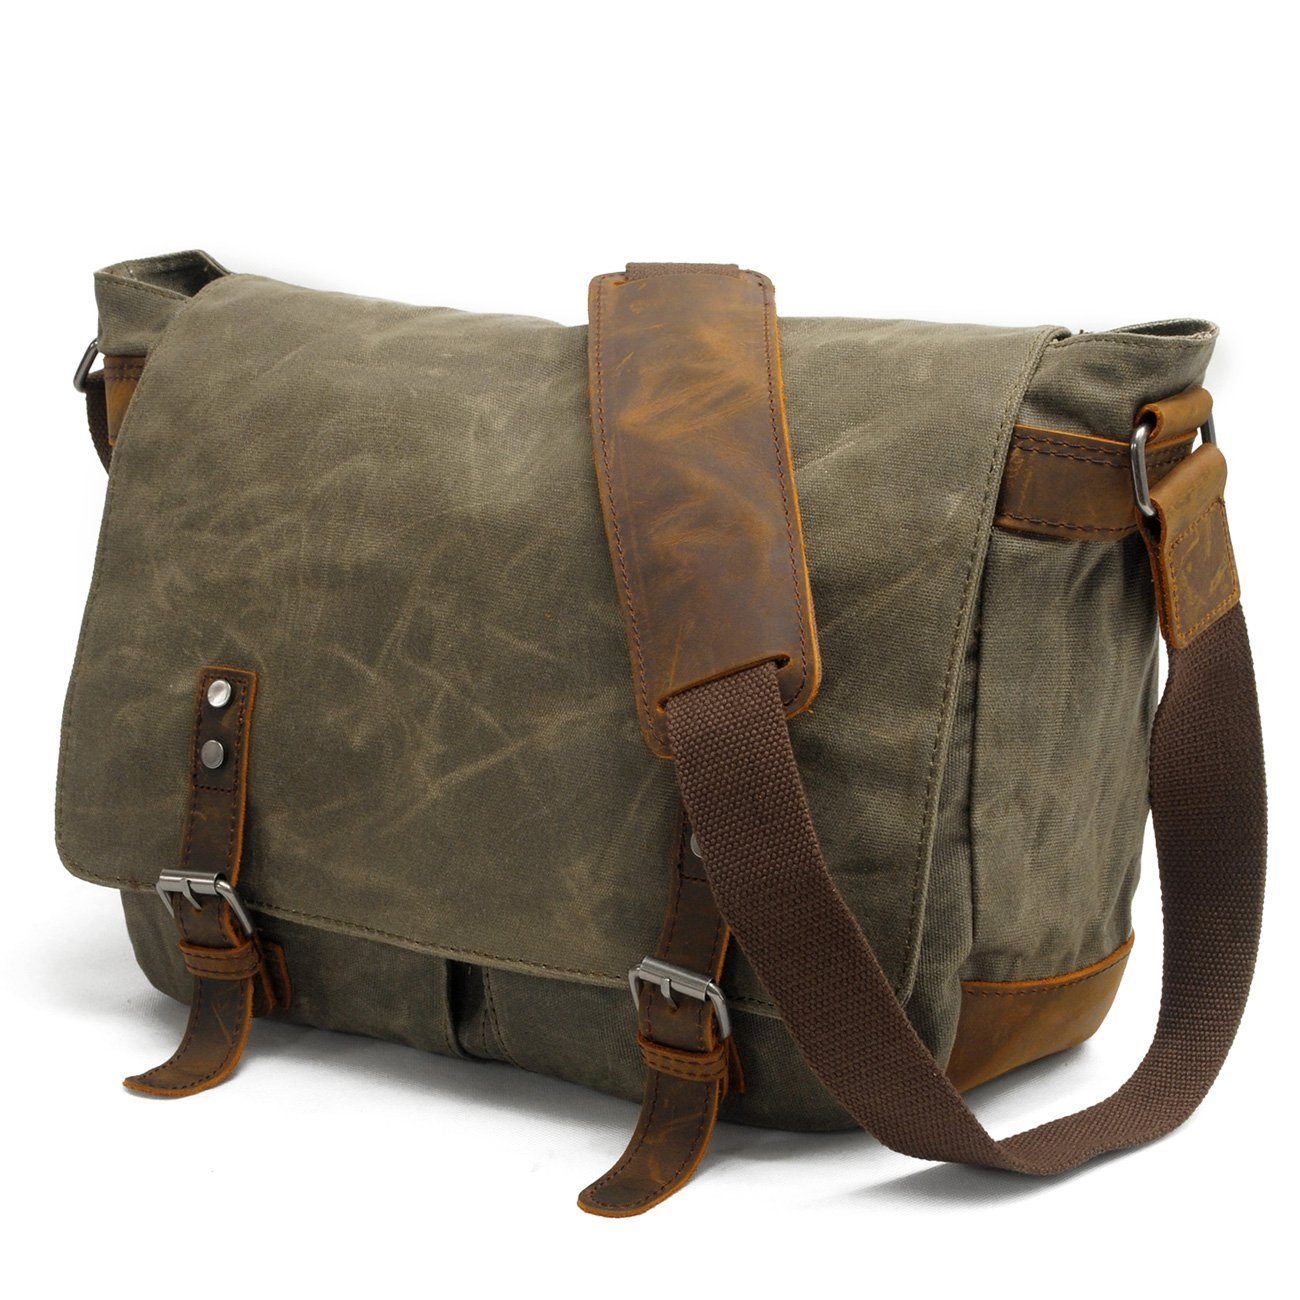 118 Products - Vintage Waterproof Canvas Coal Bag – Hudson's Hill